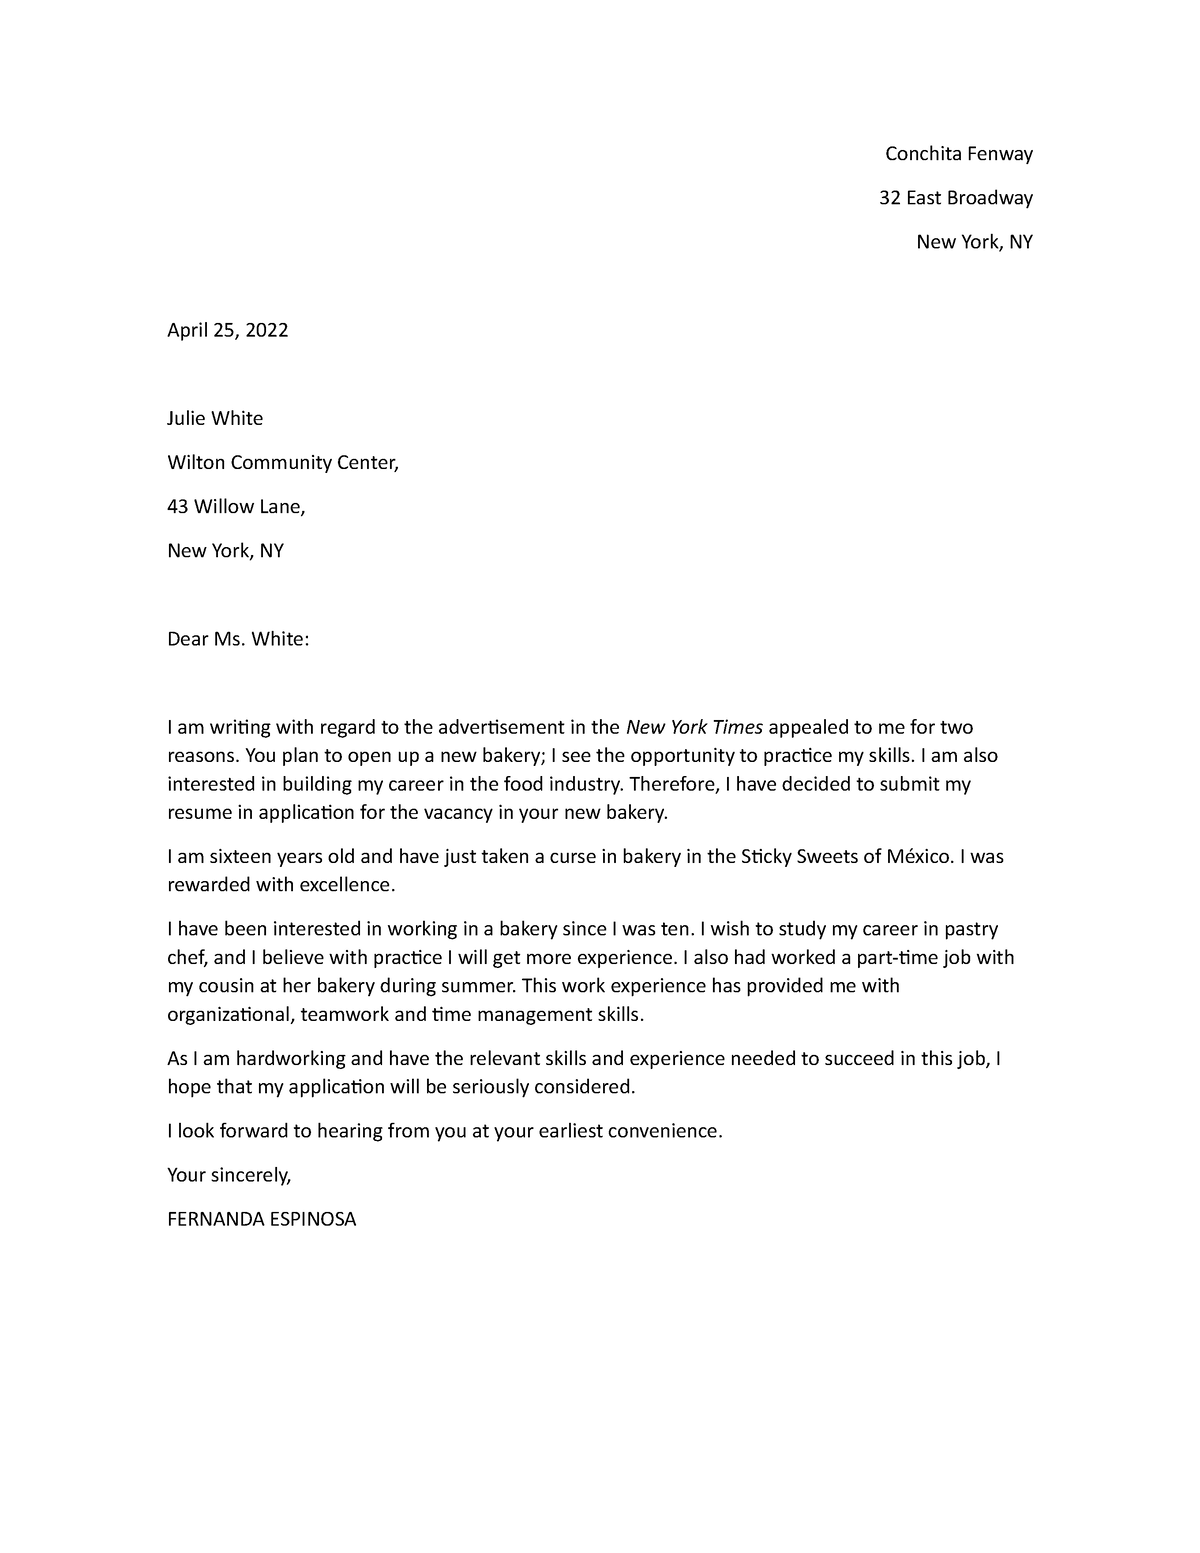 Letter Application} - ABCD - Conchita Fenway 32 East Broadway New York ...